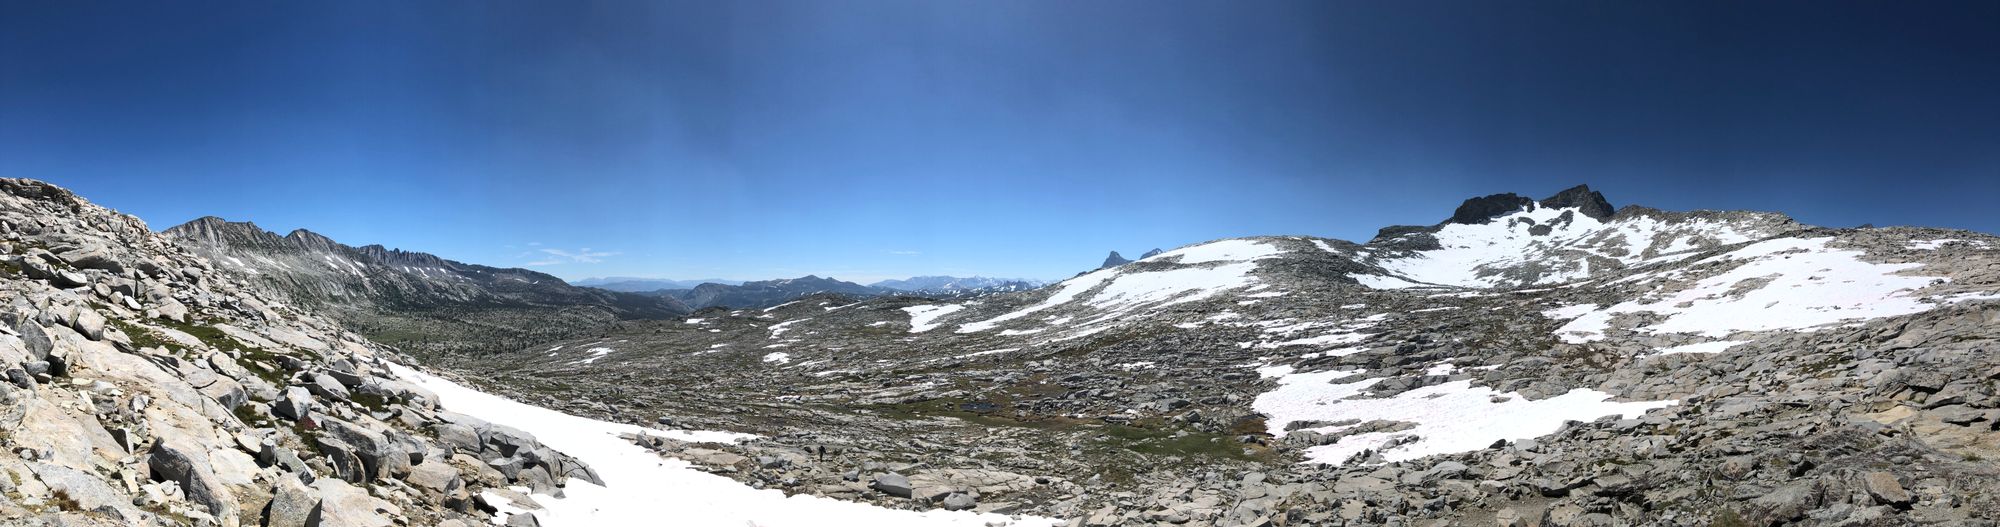 The views from Donohue Pass were spectacular.